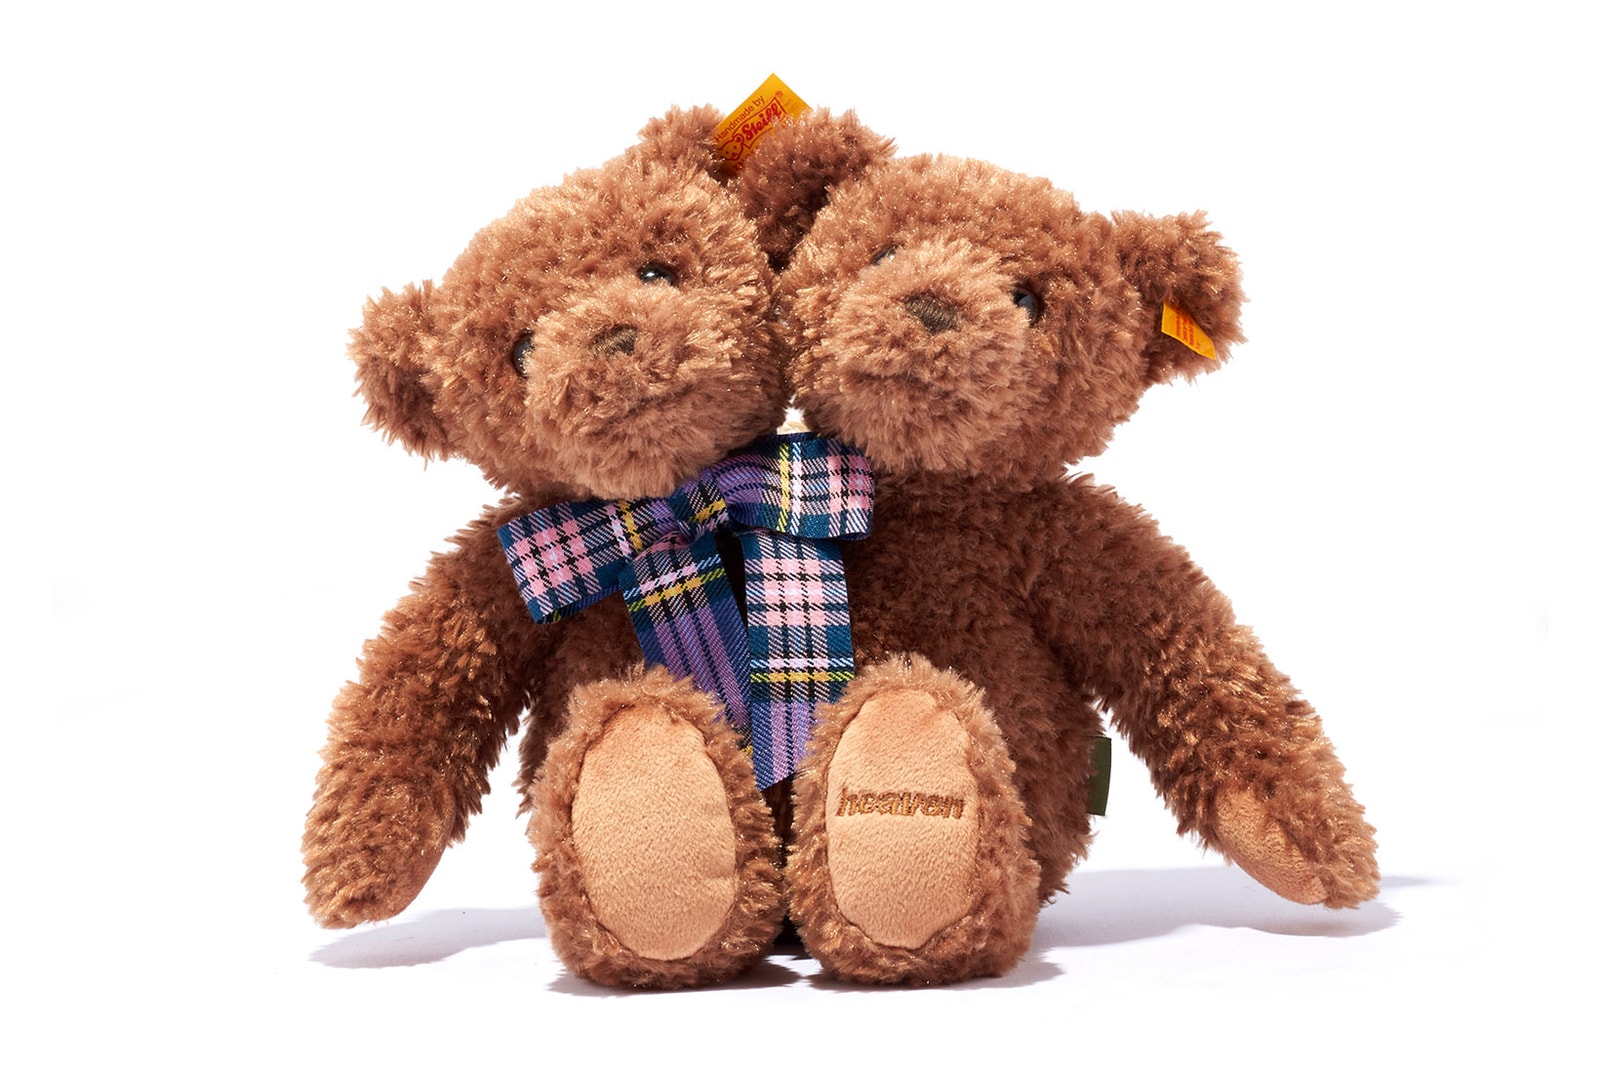 Heaven by Marc Jacobs Steiff Collaboration Teddy Bear Plush Release Where to buy